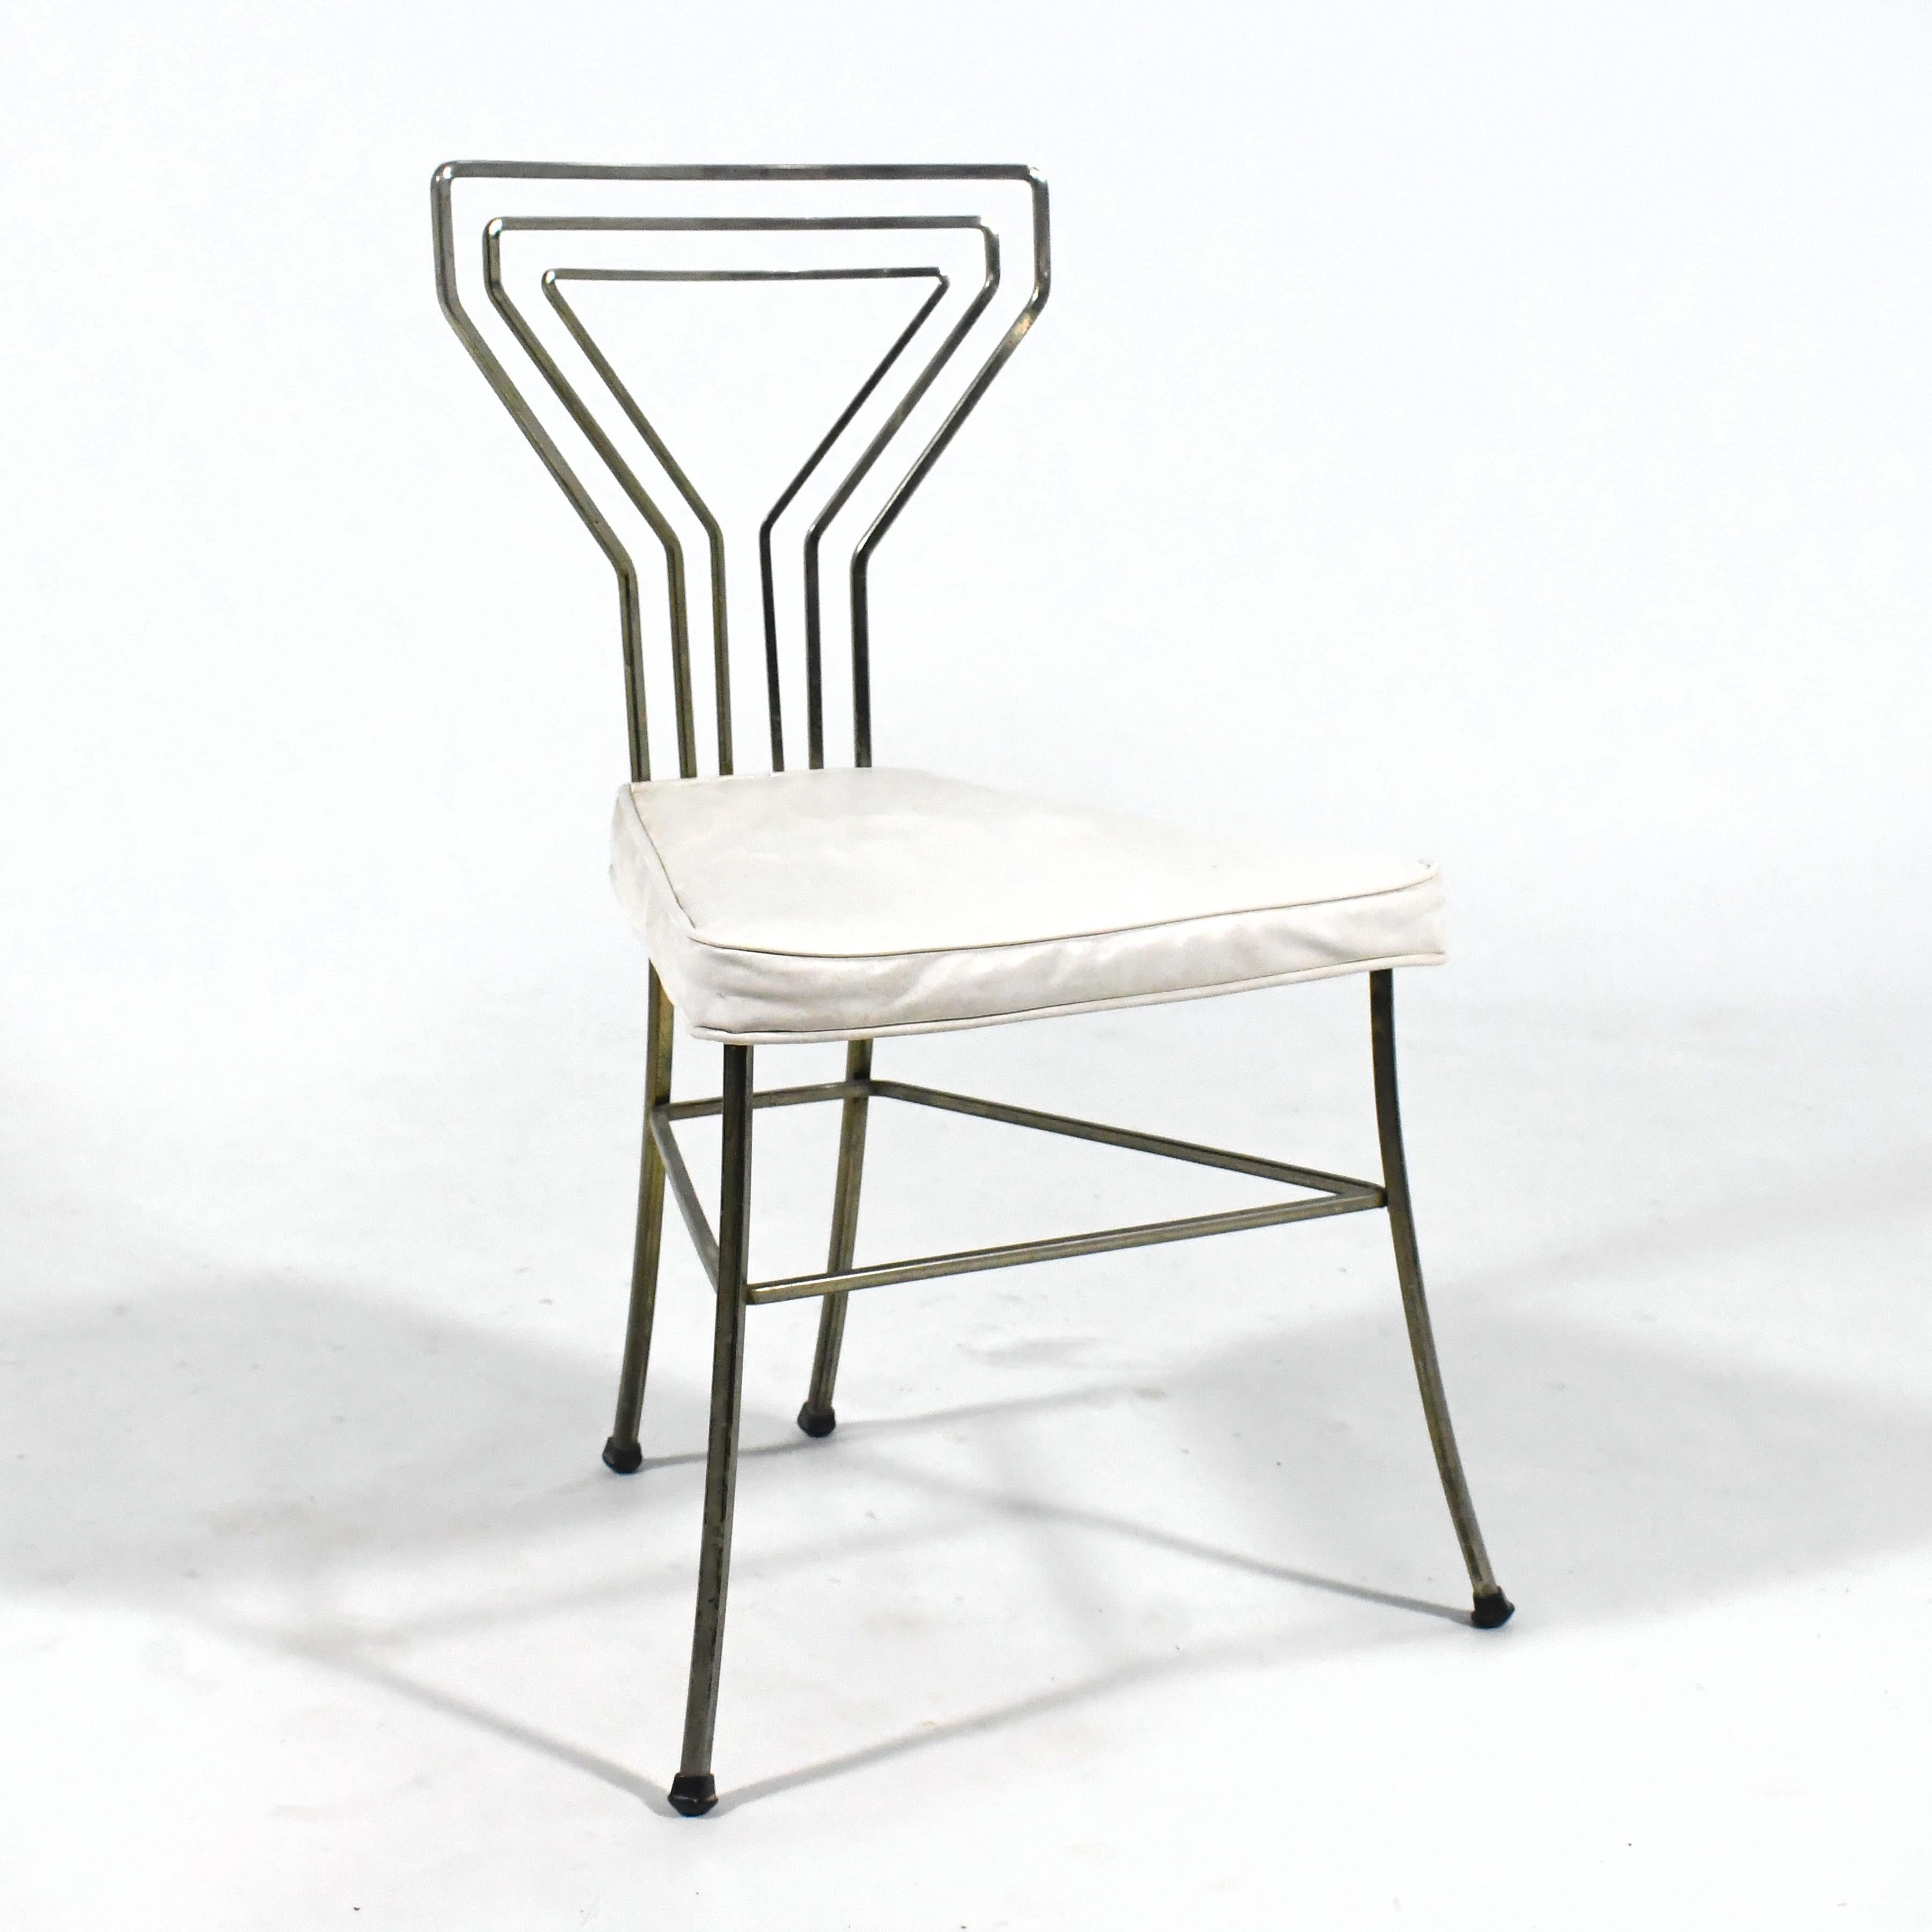 A visually light and lovely design from the 1950s, this side chair has a back with a pattern in bent square stock that echos the shape of a martini glass.

31.55